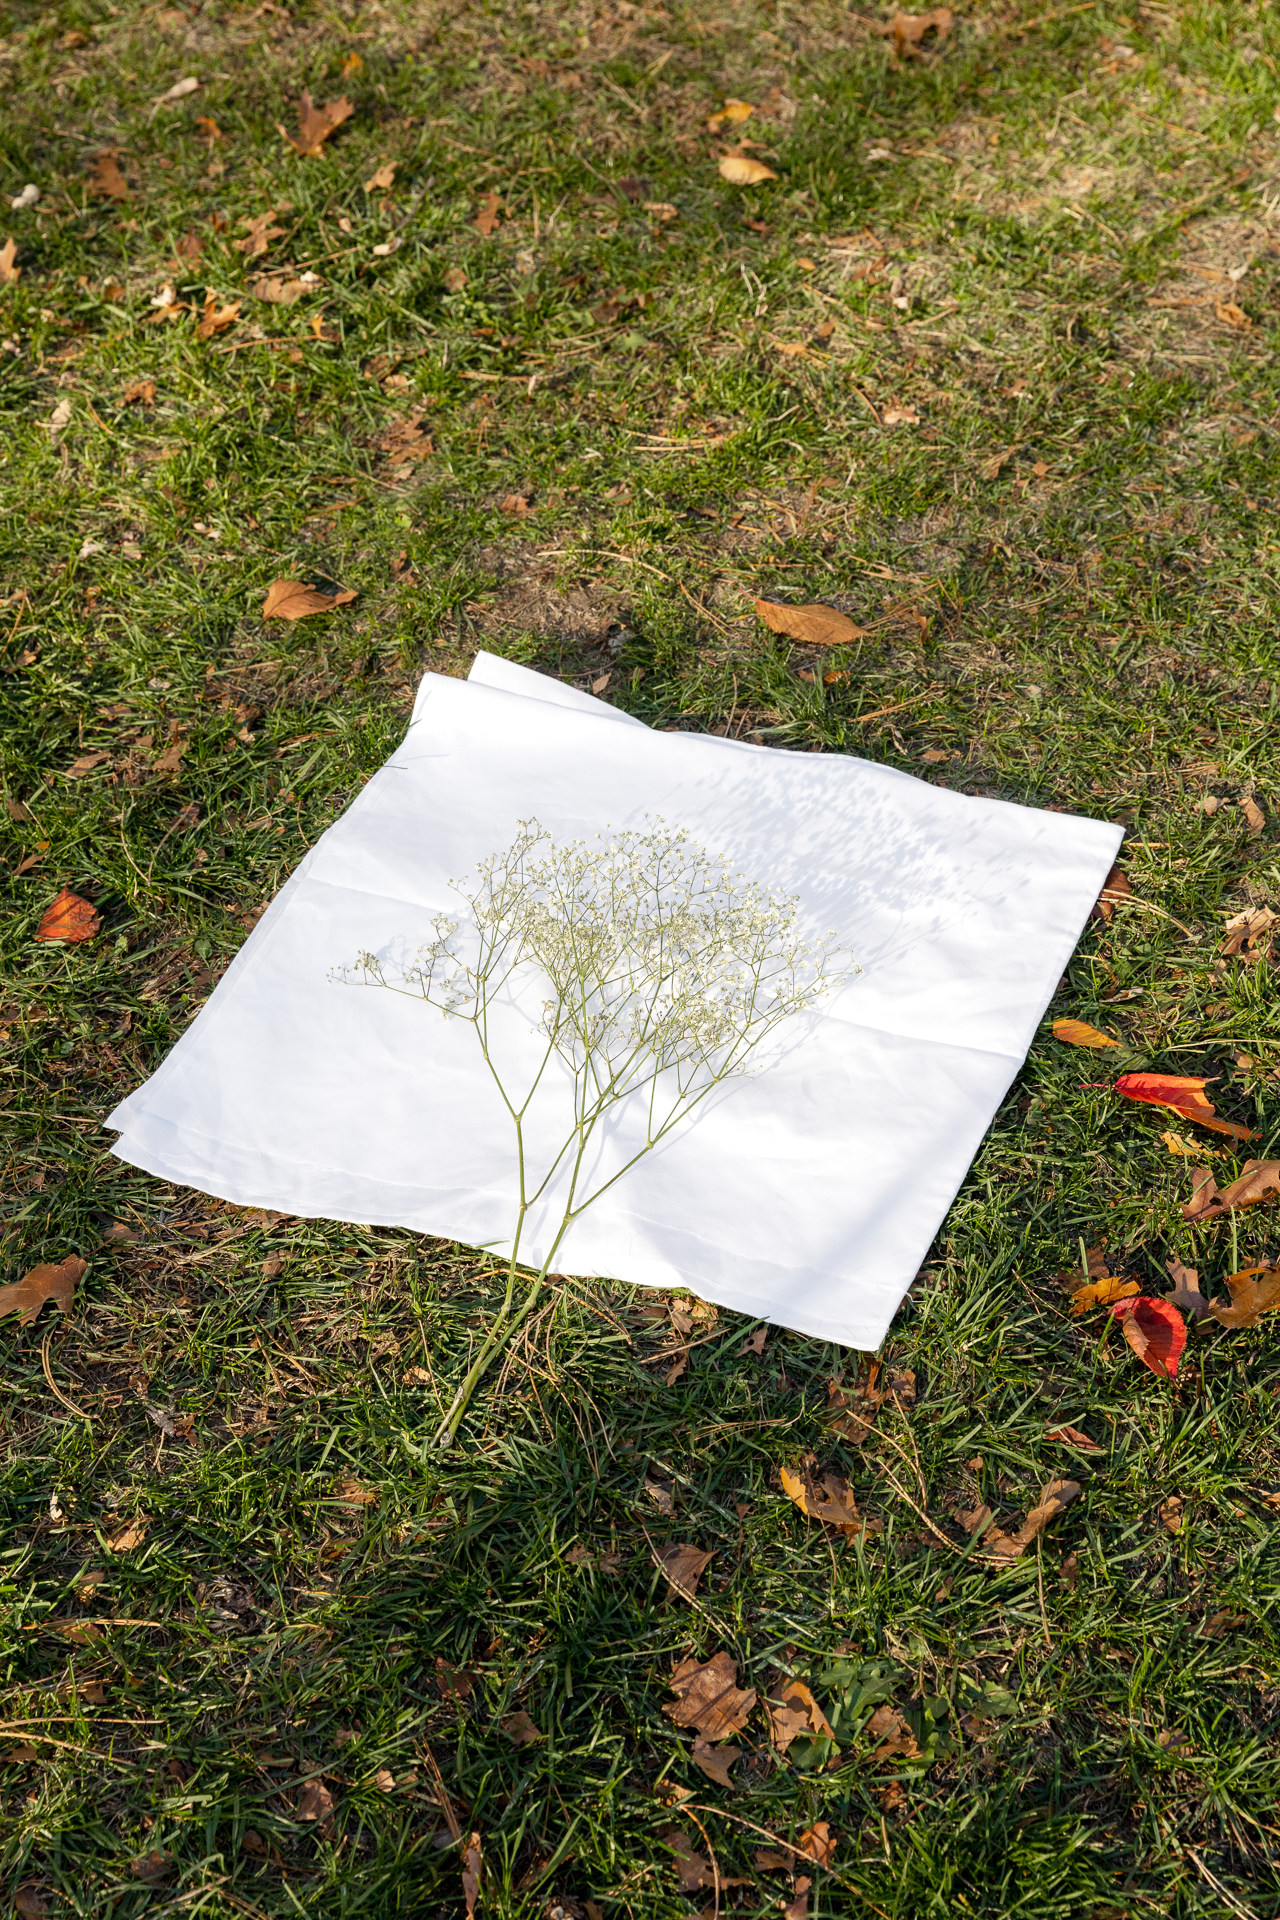 Surrender: A Baby's-Breath flower rested on top of a folded white cloth in the center of a green grass field with orange, red and brown leaves scattered around on a bright day.